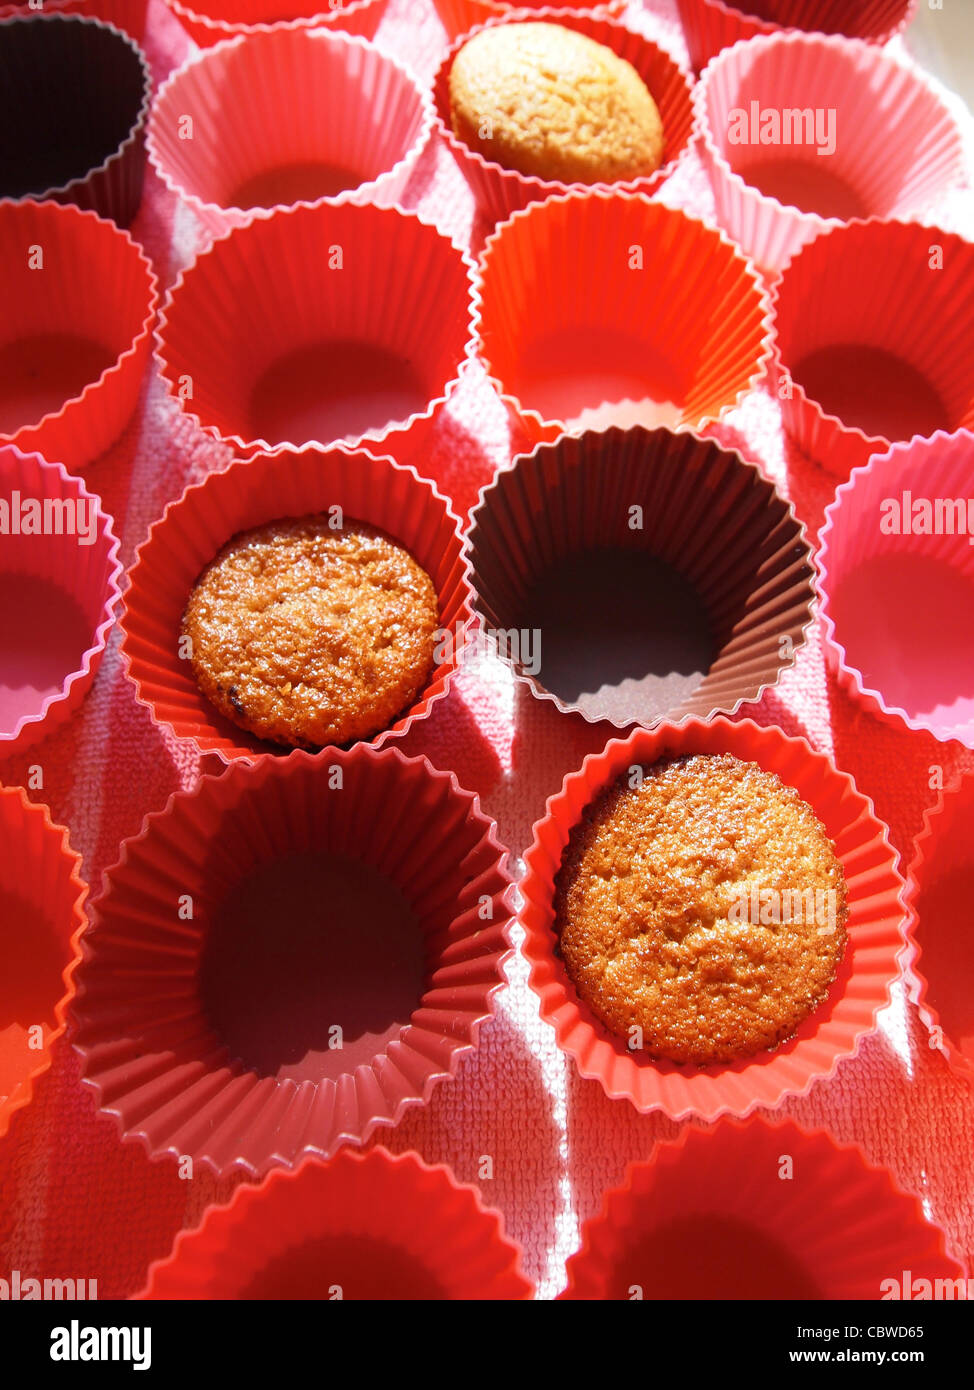 Muffins and empty cake cases Stock Photo